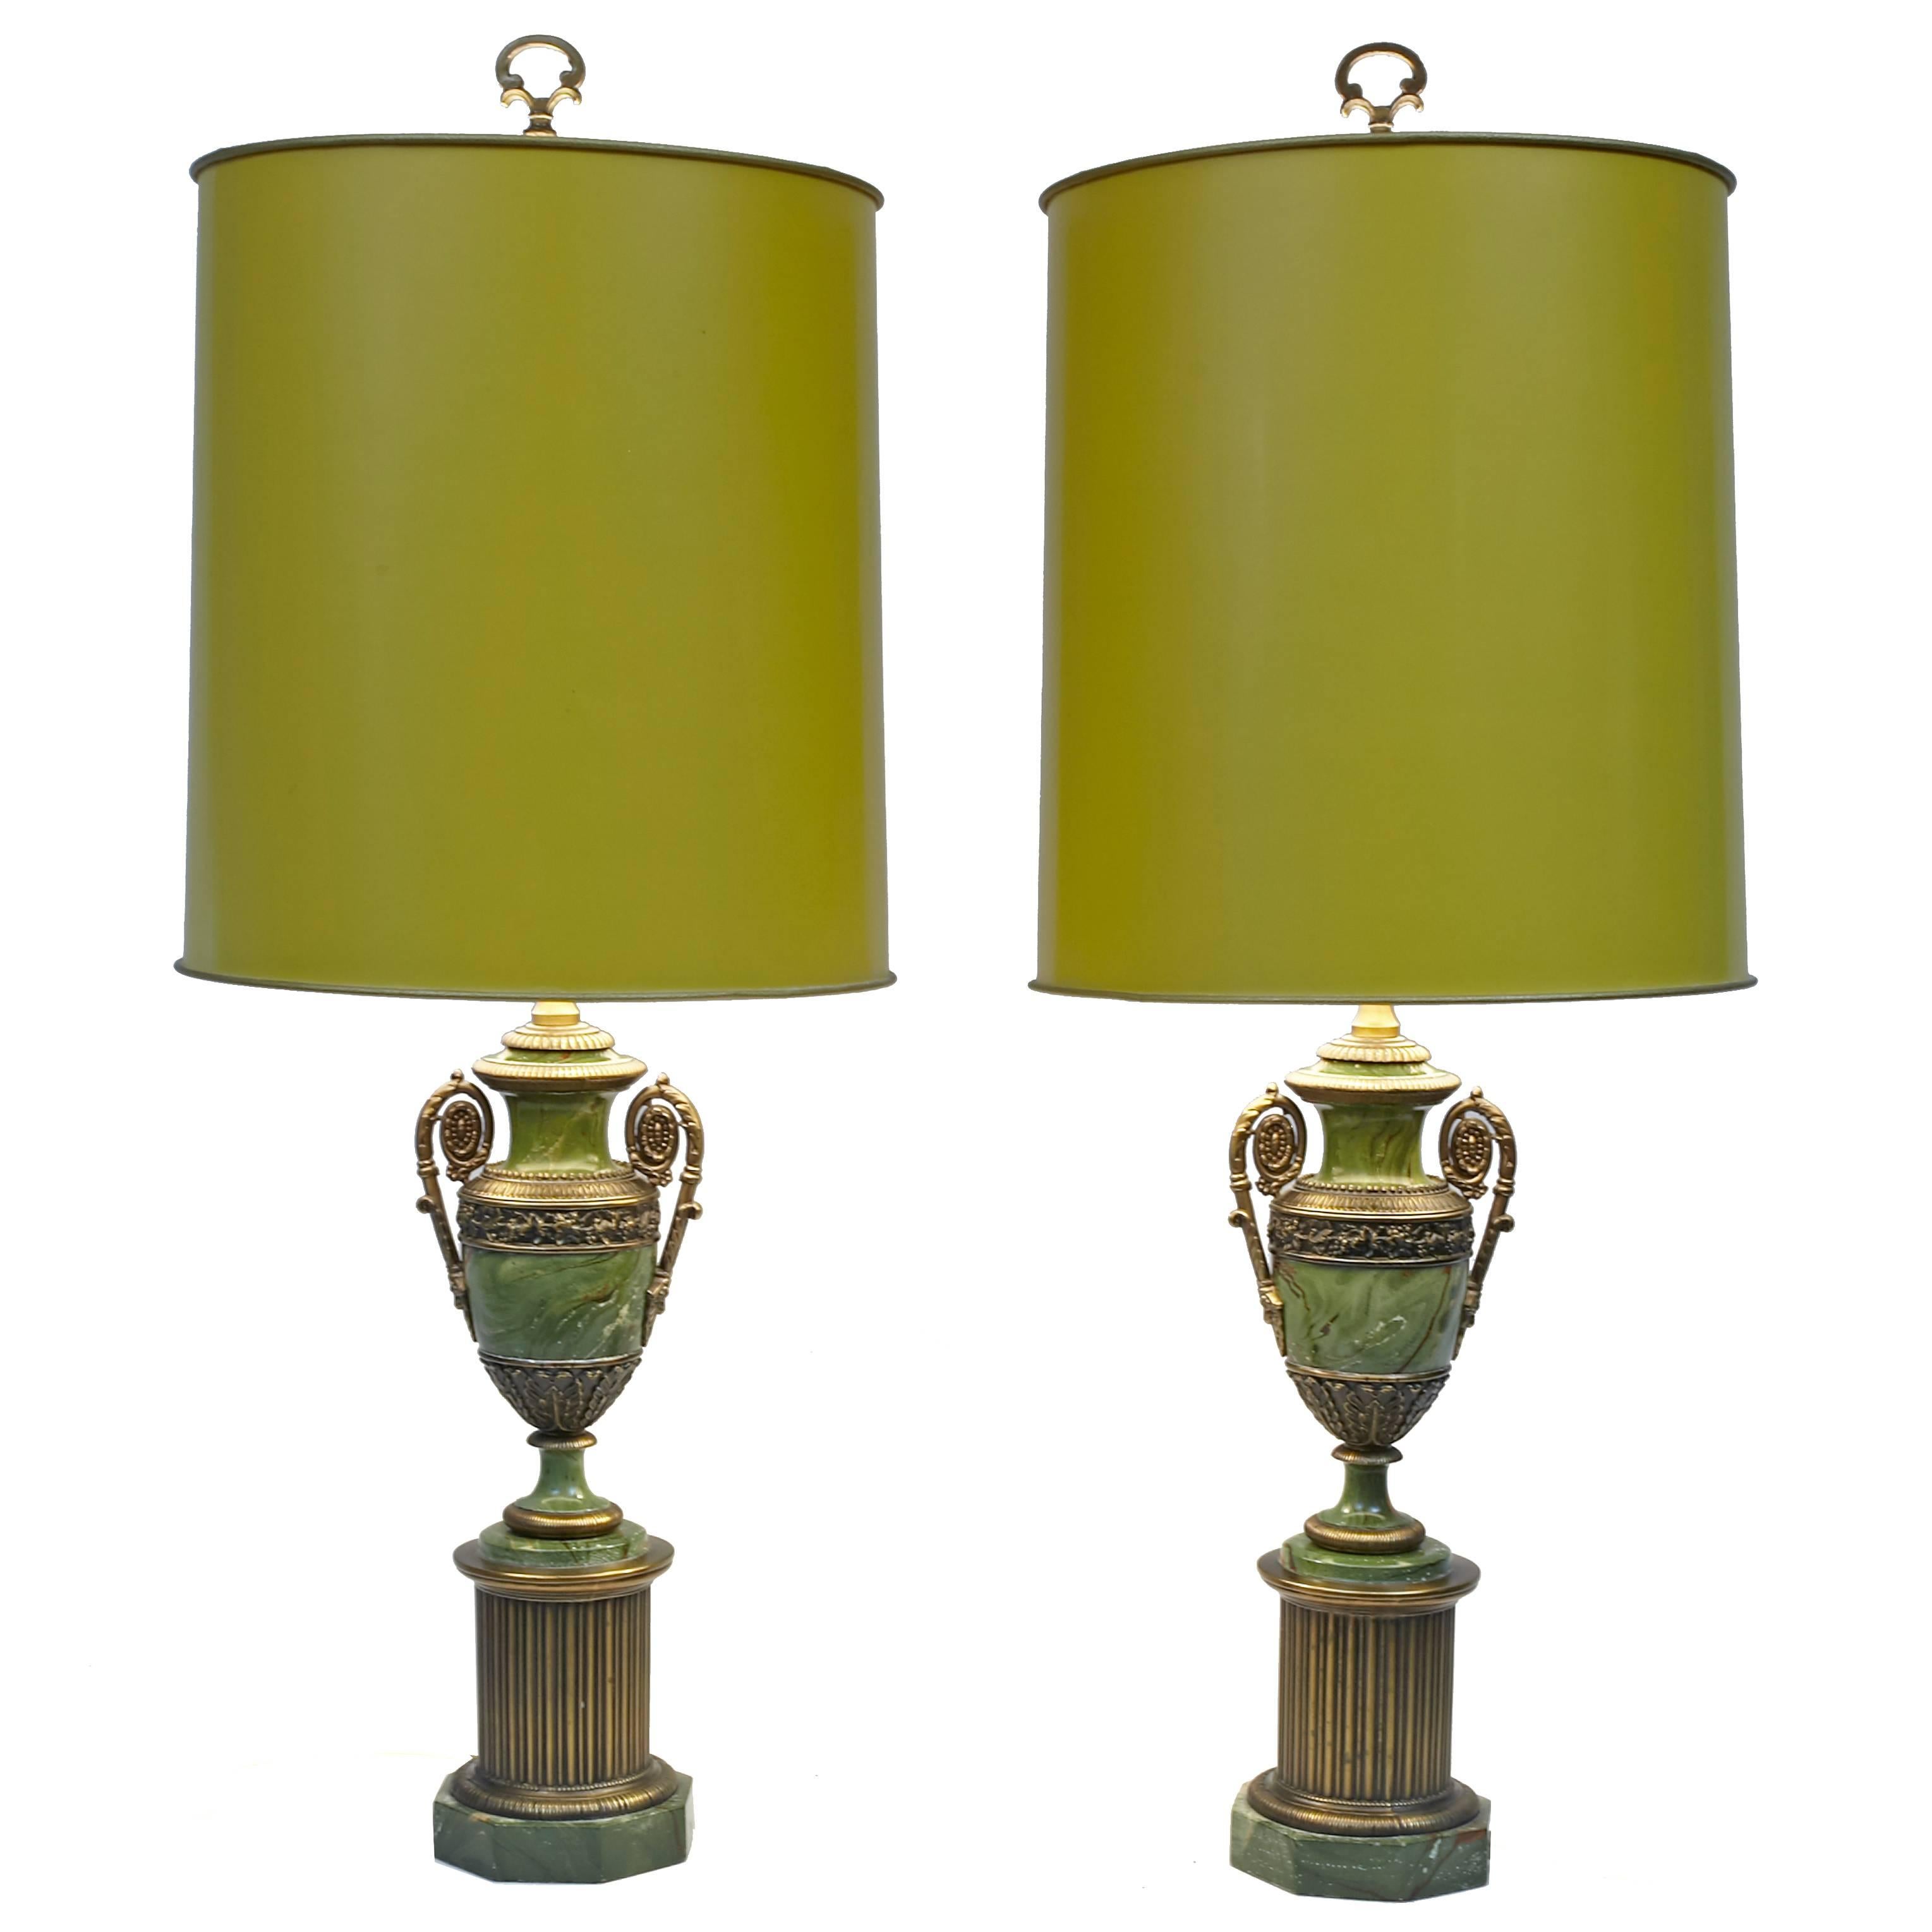 Pair of Paul Hanson Faux Malachite Table Lamps with Original Shades and Finials